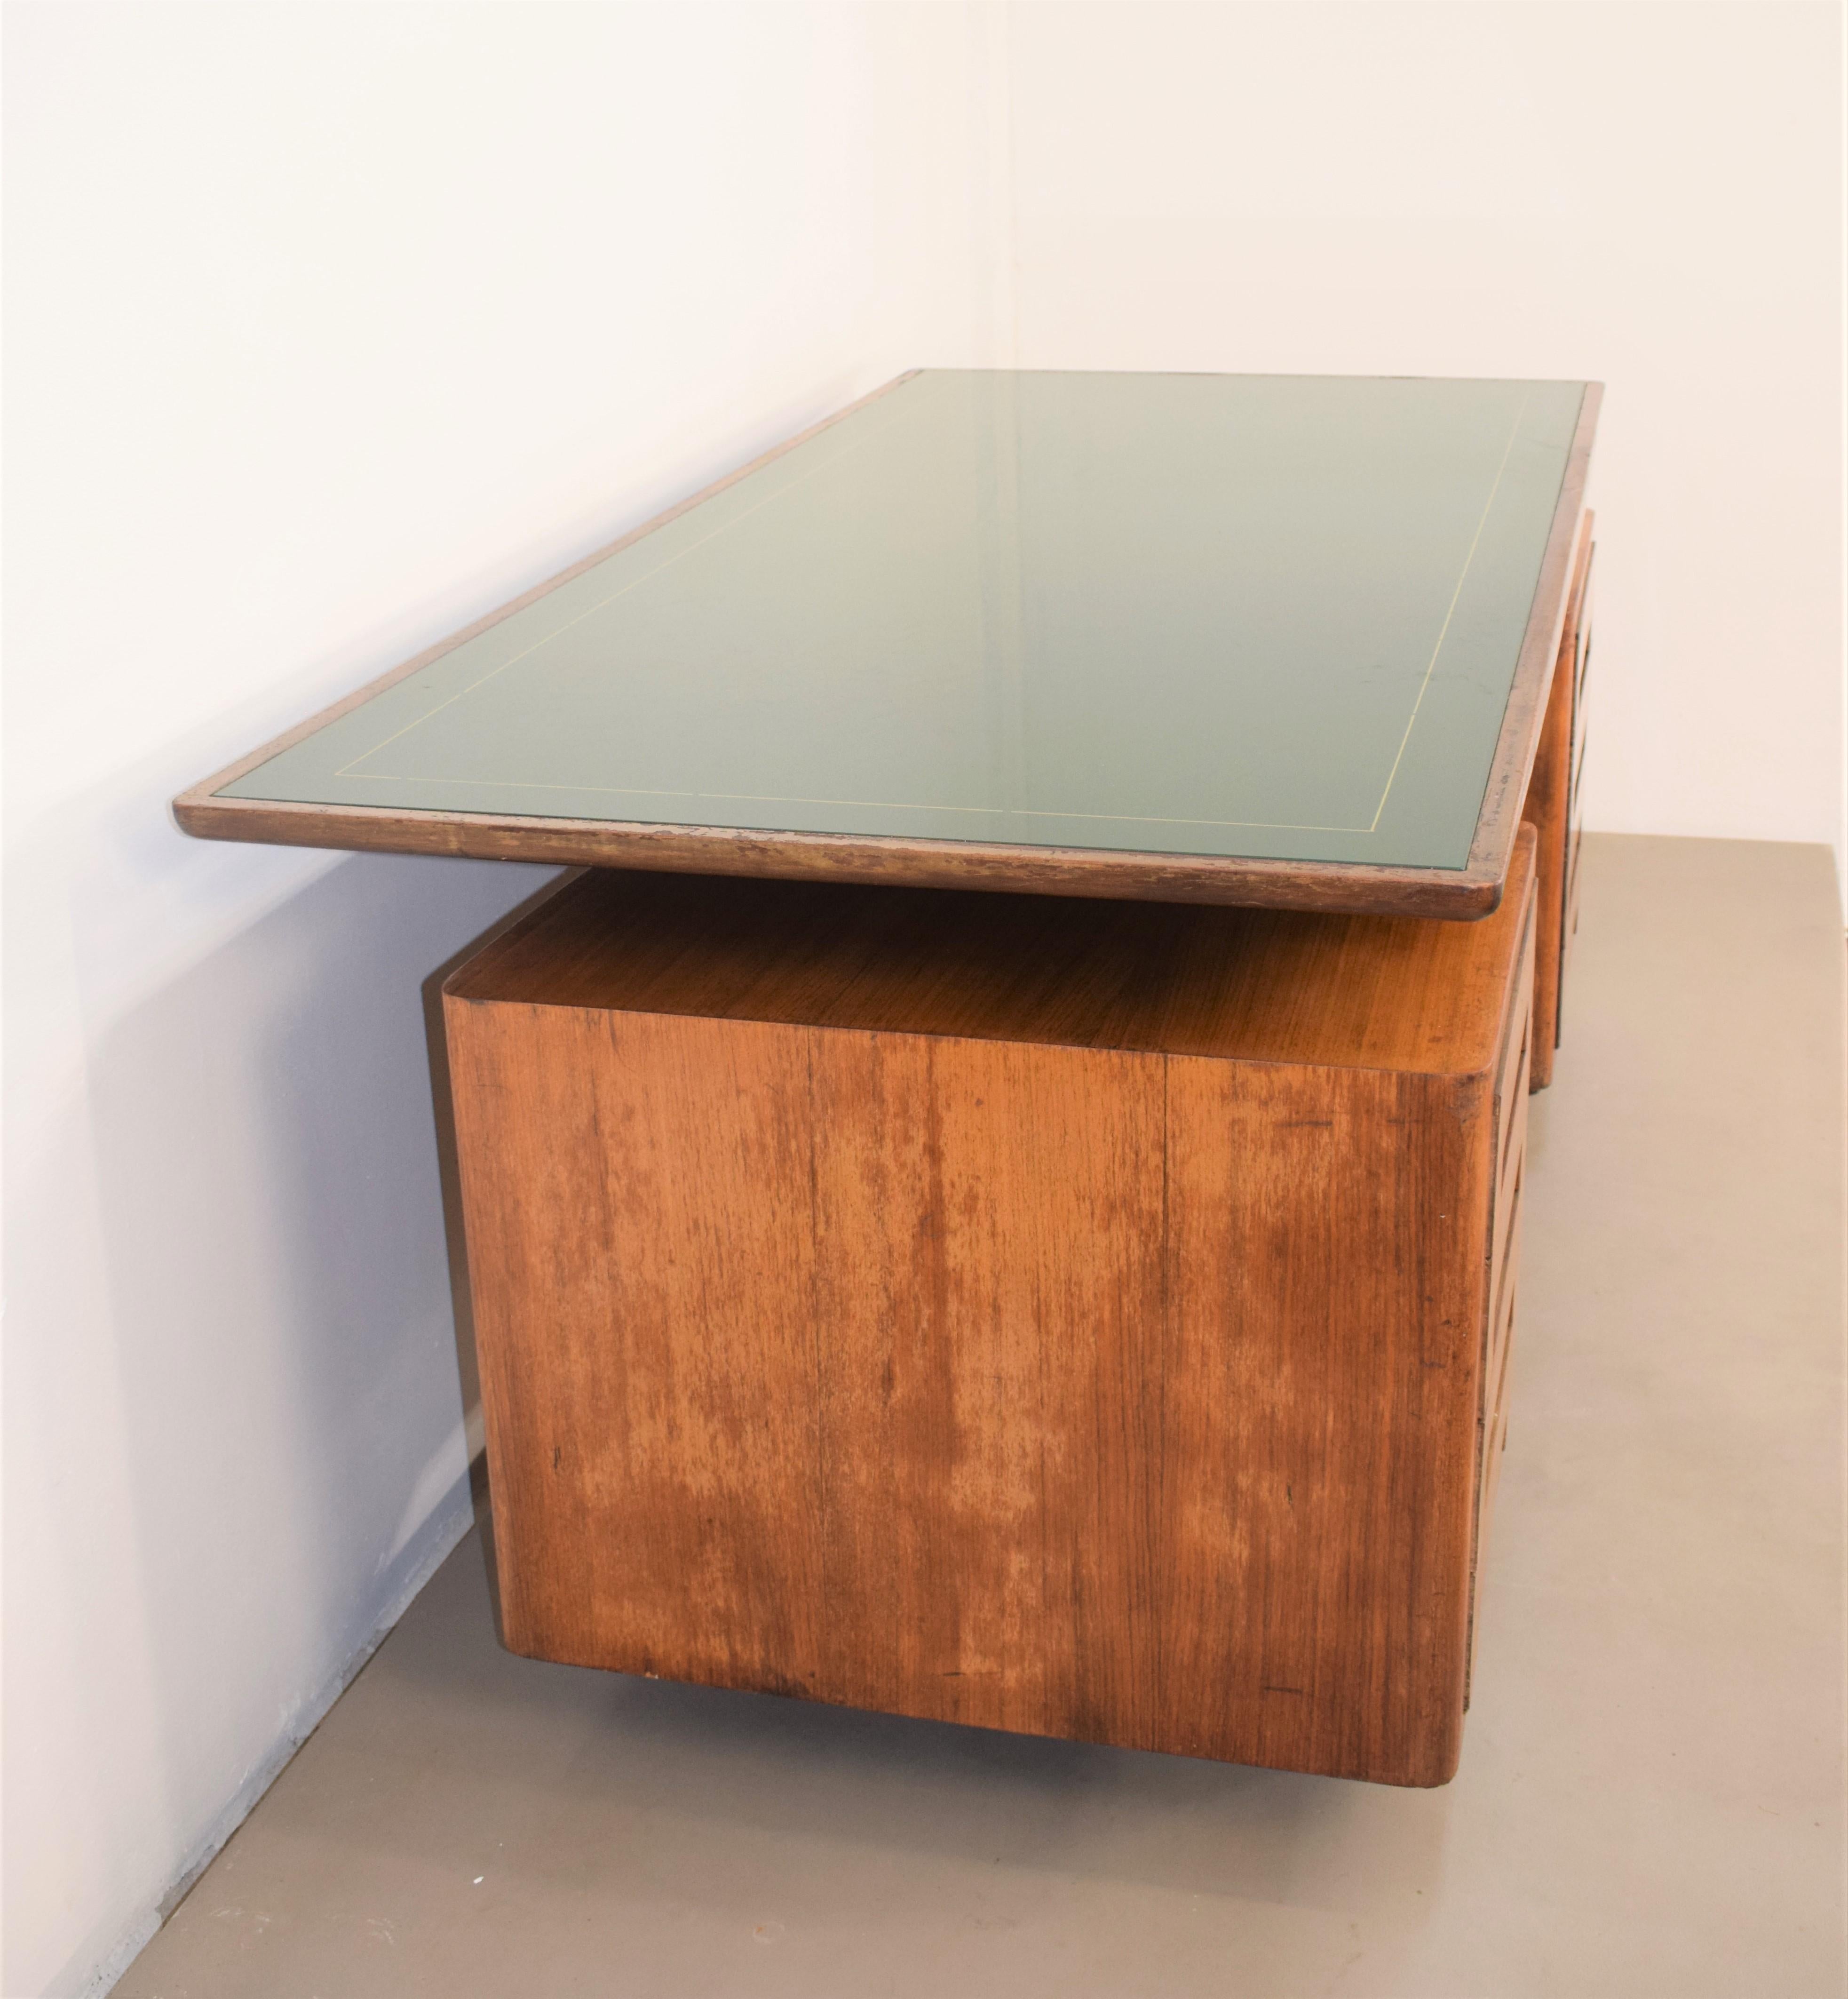 Mid-Century Modern Italian Desk by Gio Ponti Attributed, 1950s For Sale